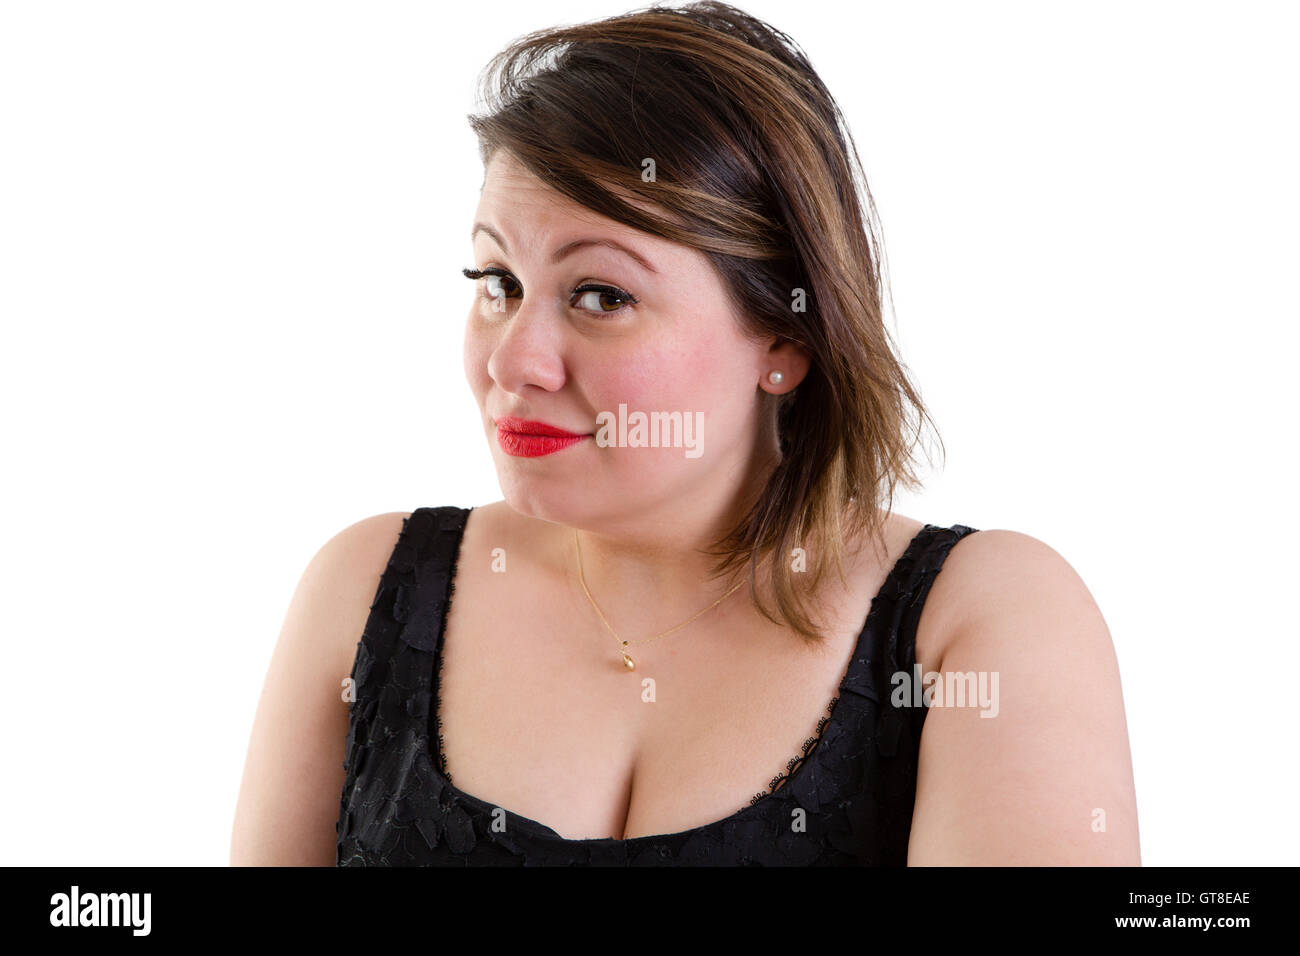 Sceptical woman with raised eyebrows looking sideways at the camera with a quizzical expression showing her incredulity and dist Stock Photo